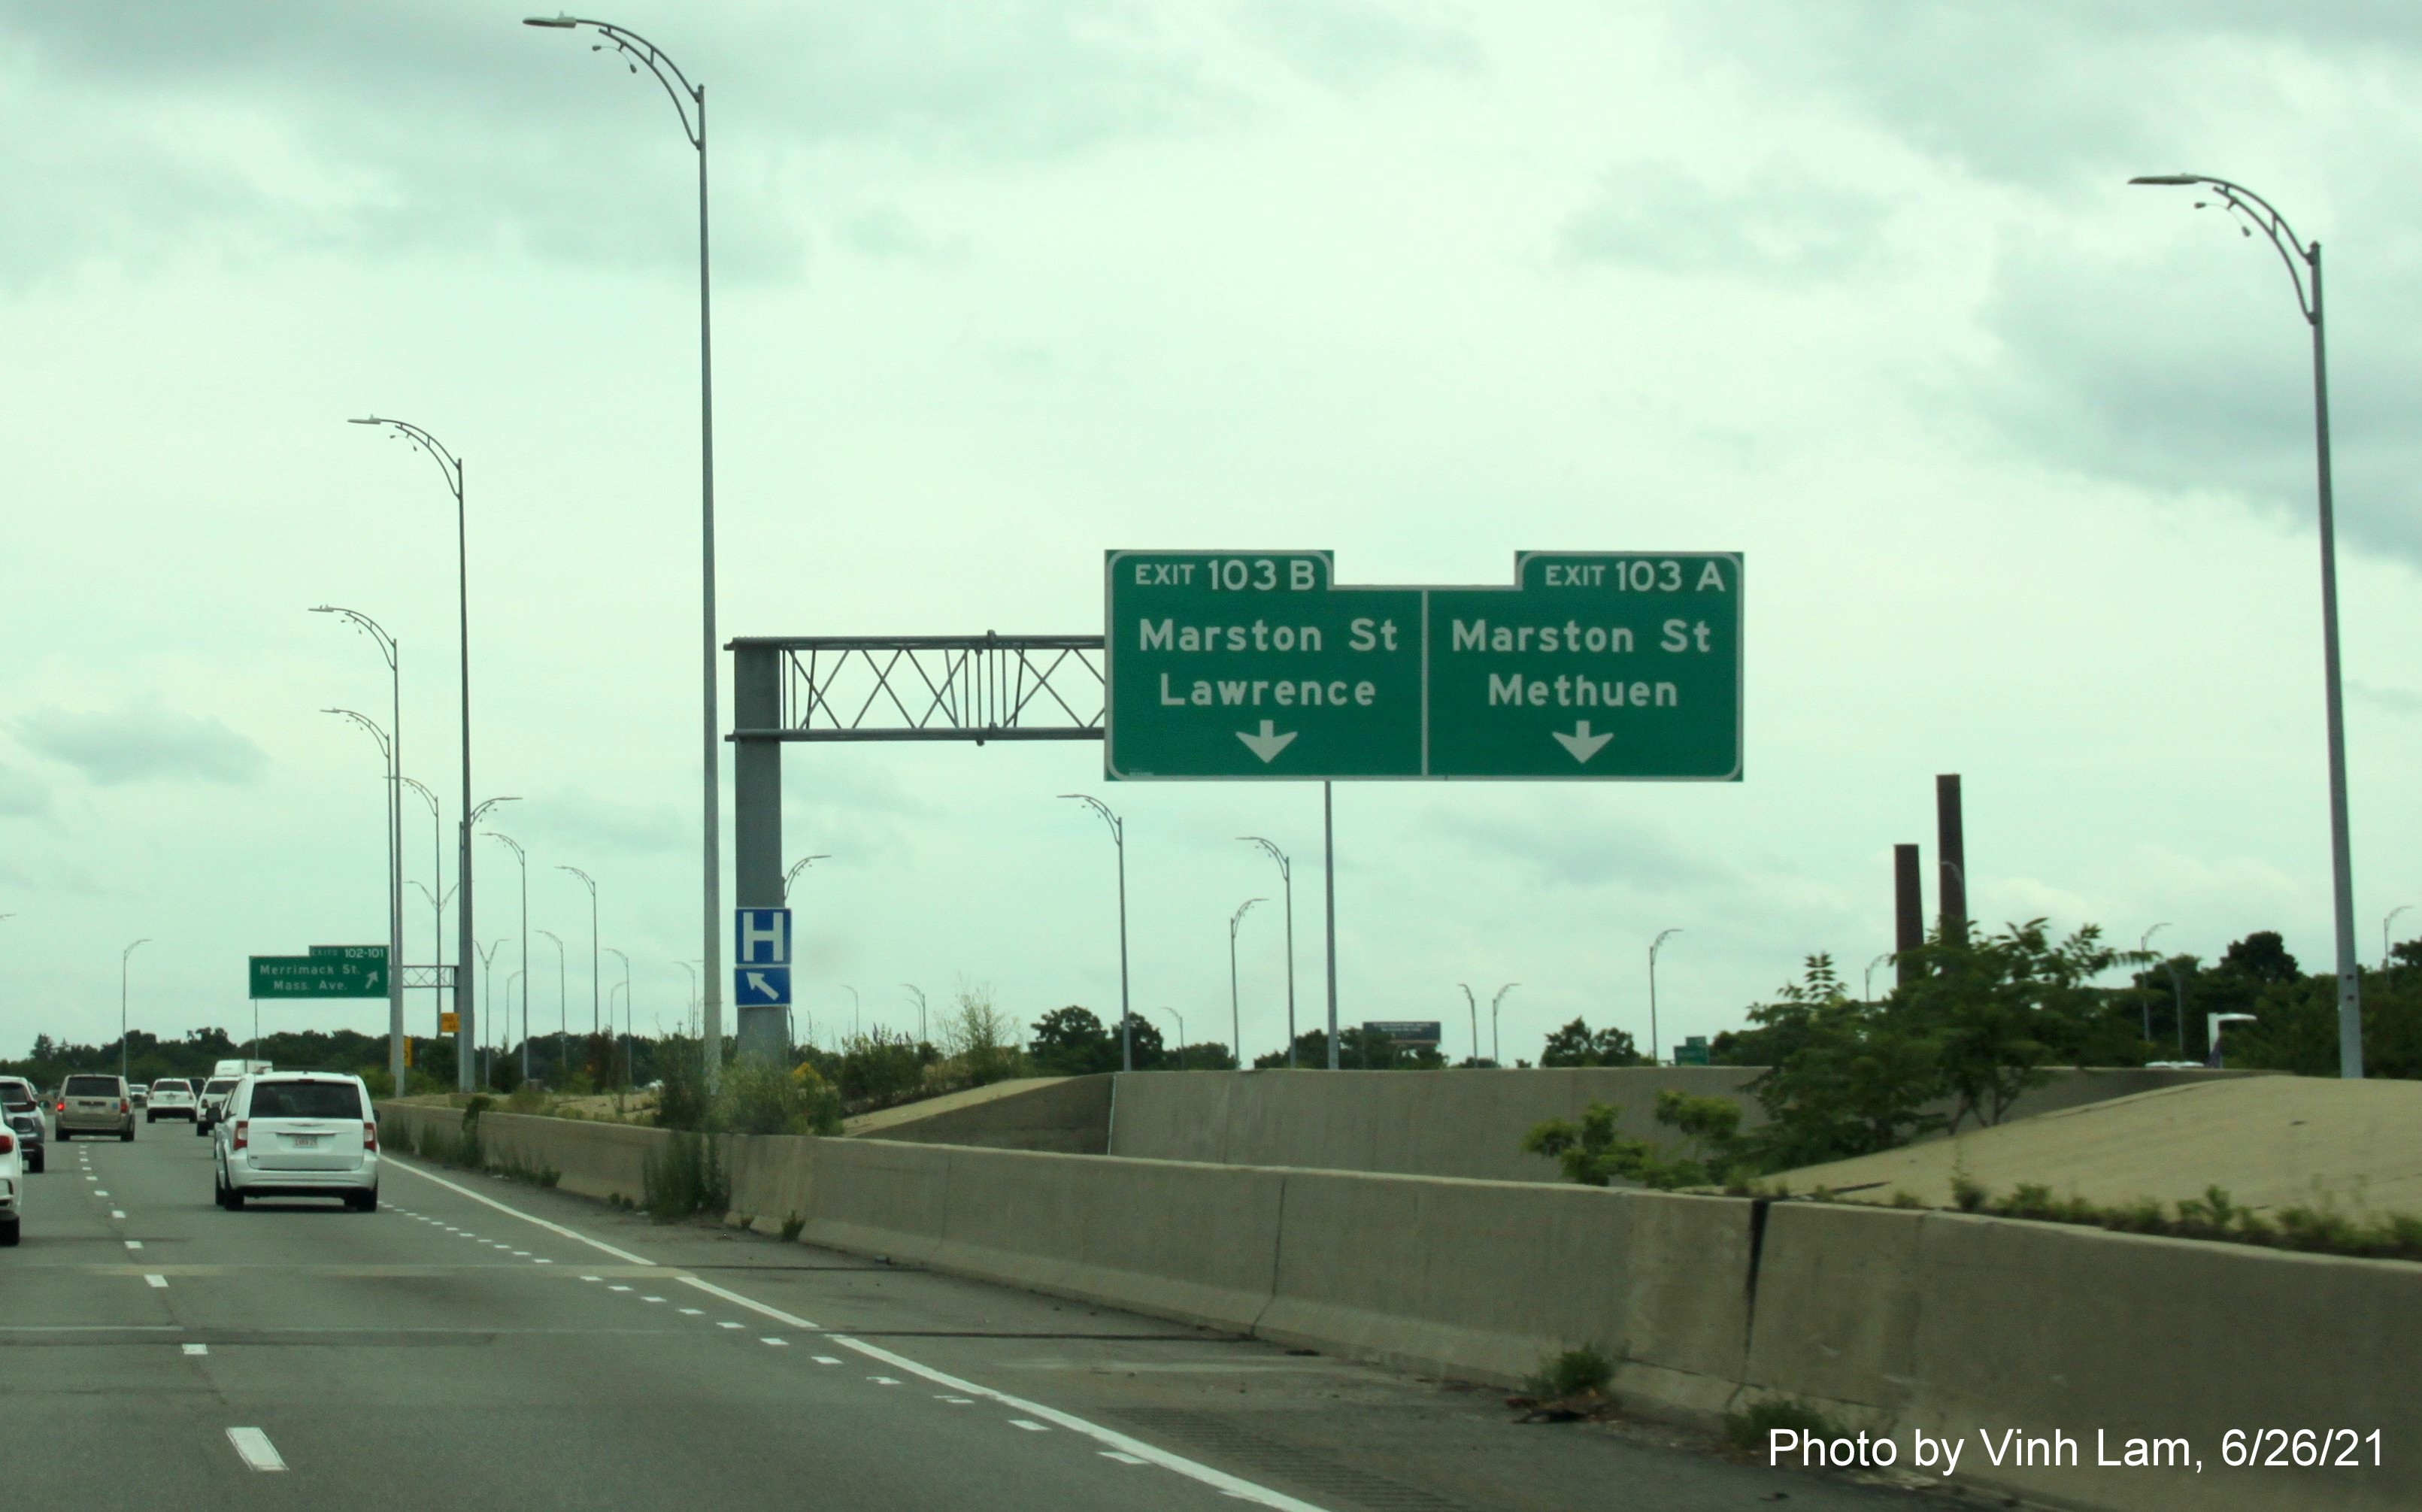 Image of overhead ramp signs for Merrimack Street and Mass. Avenue exits with new milepost based exit numbers on C/D ramp from I-495 South in Lawrence, photo by Vinh Lam, June 2021